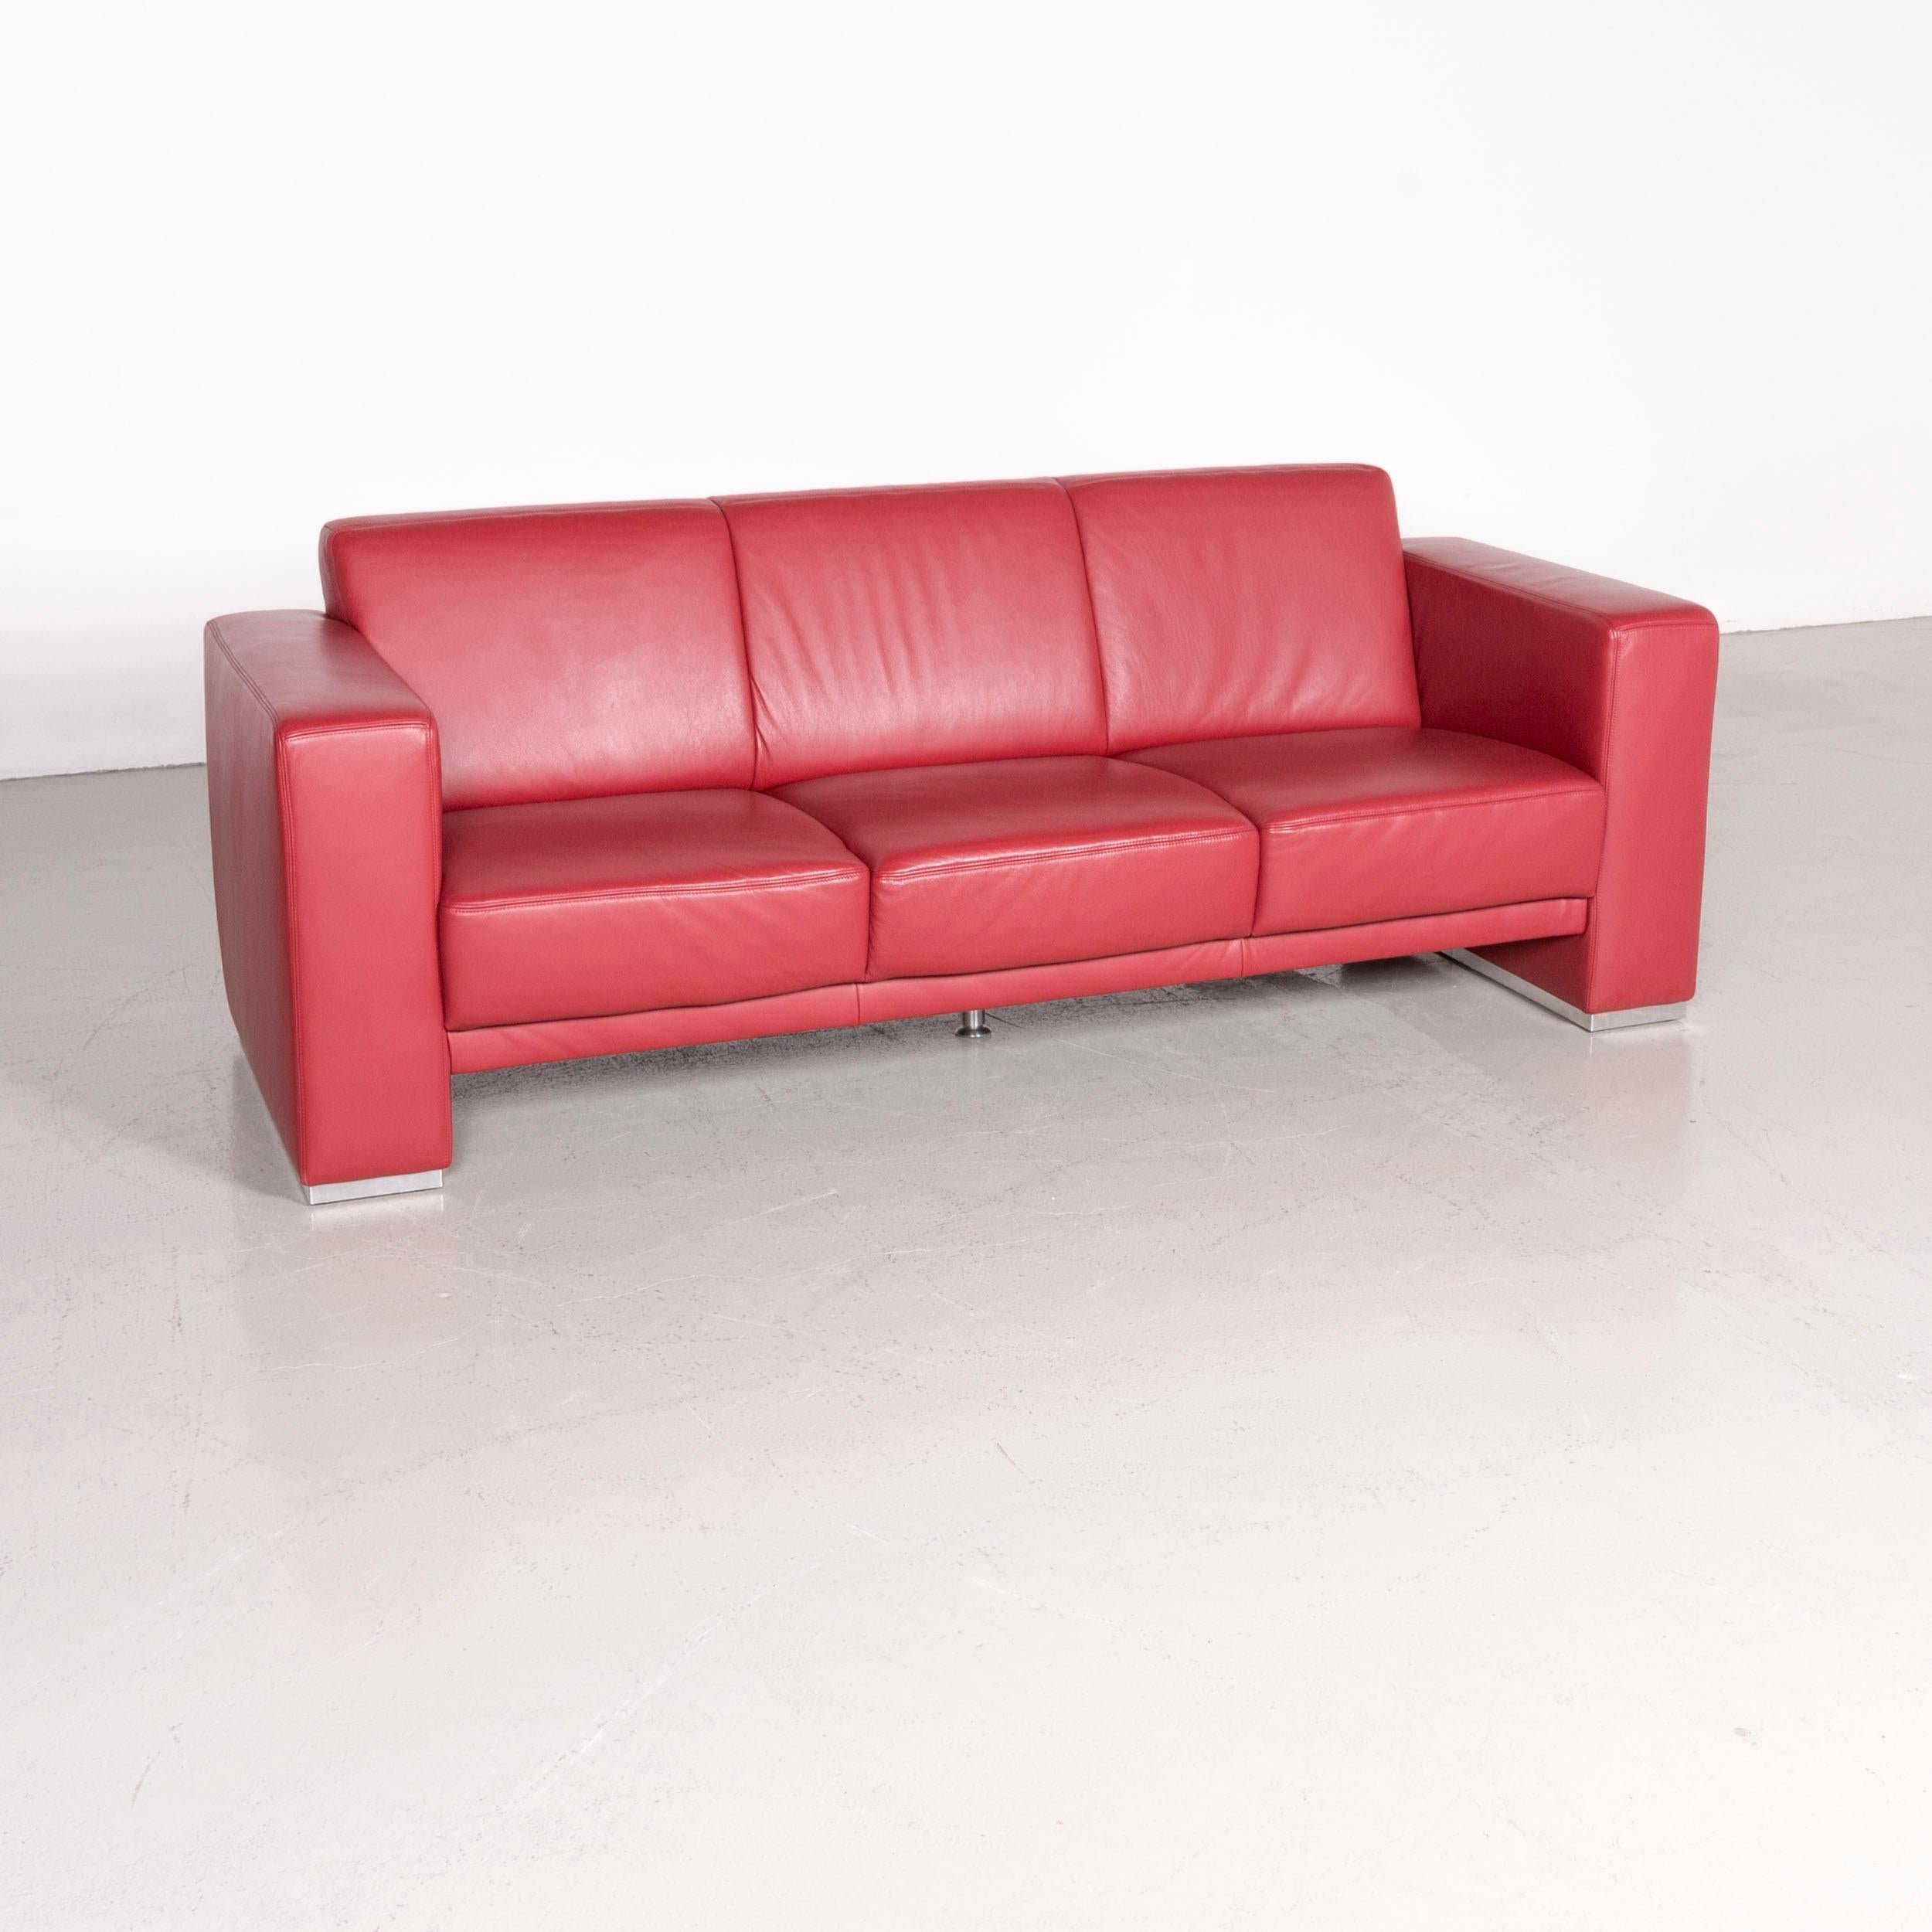 Koinor Nove designer leather sofa red two-seat couch.